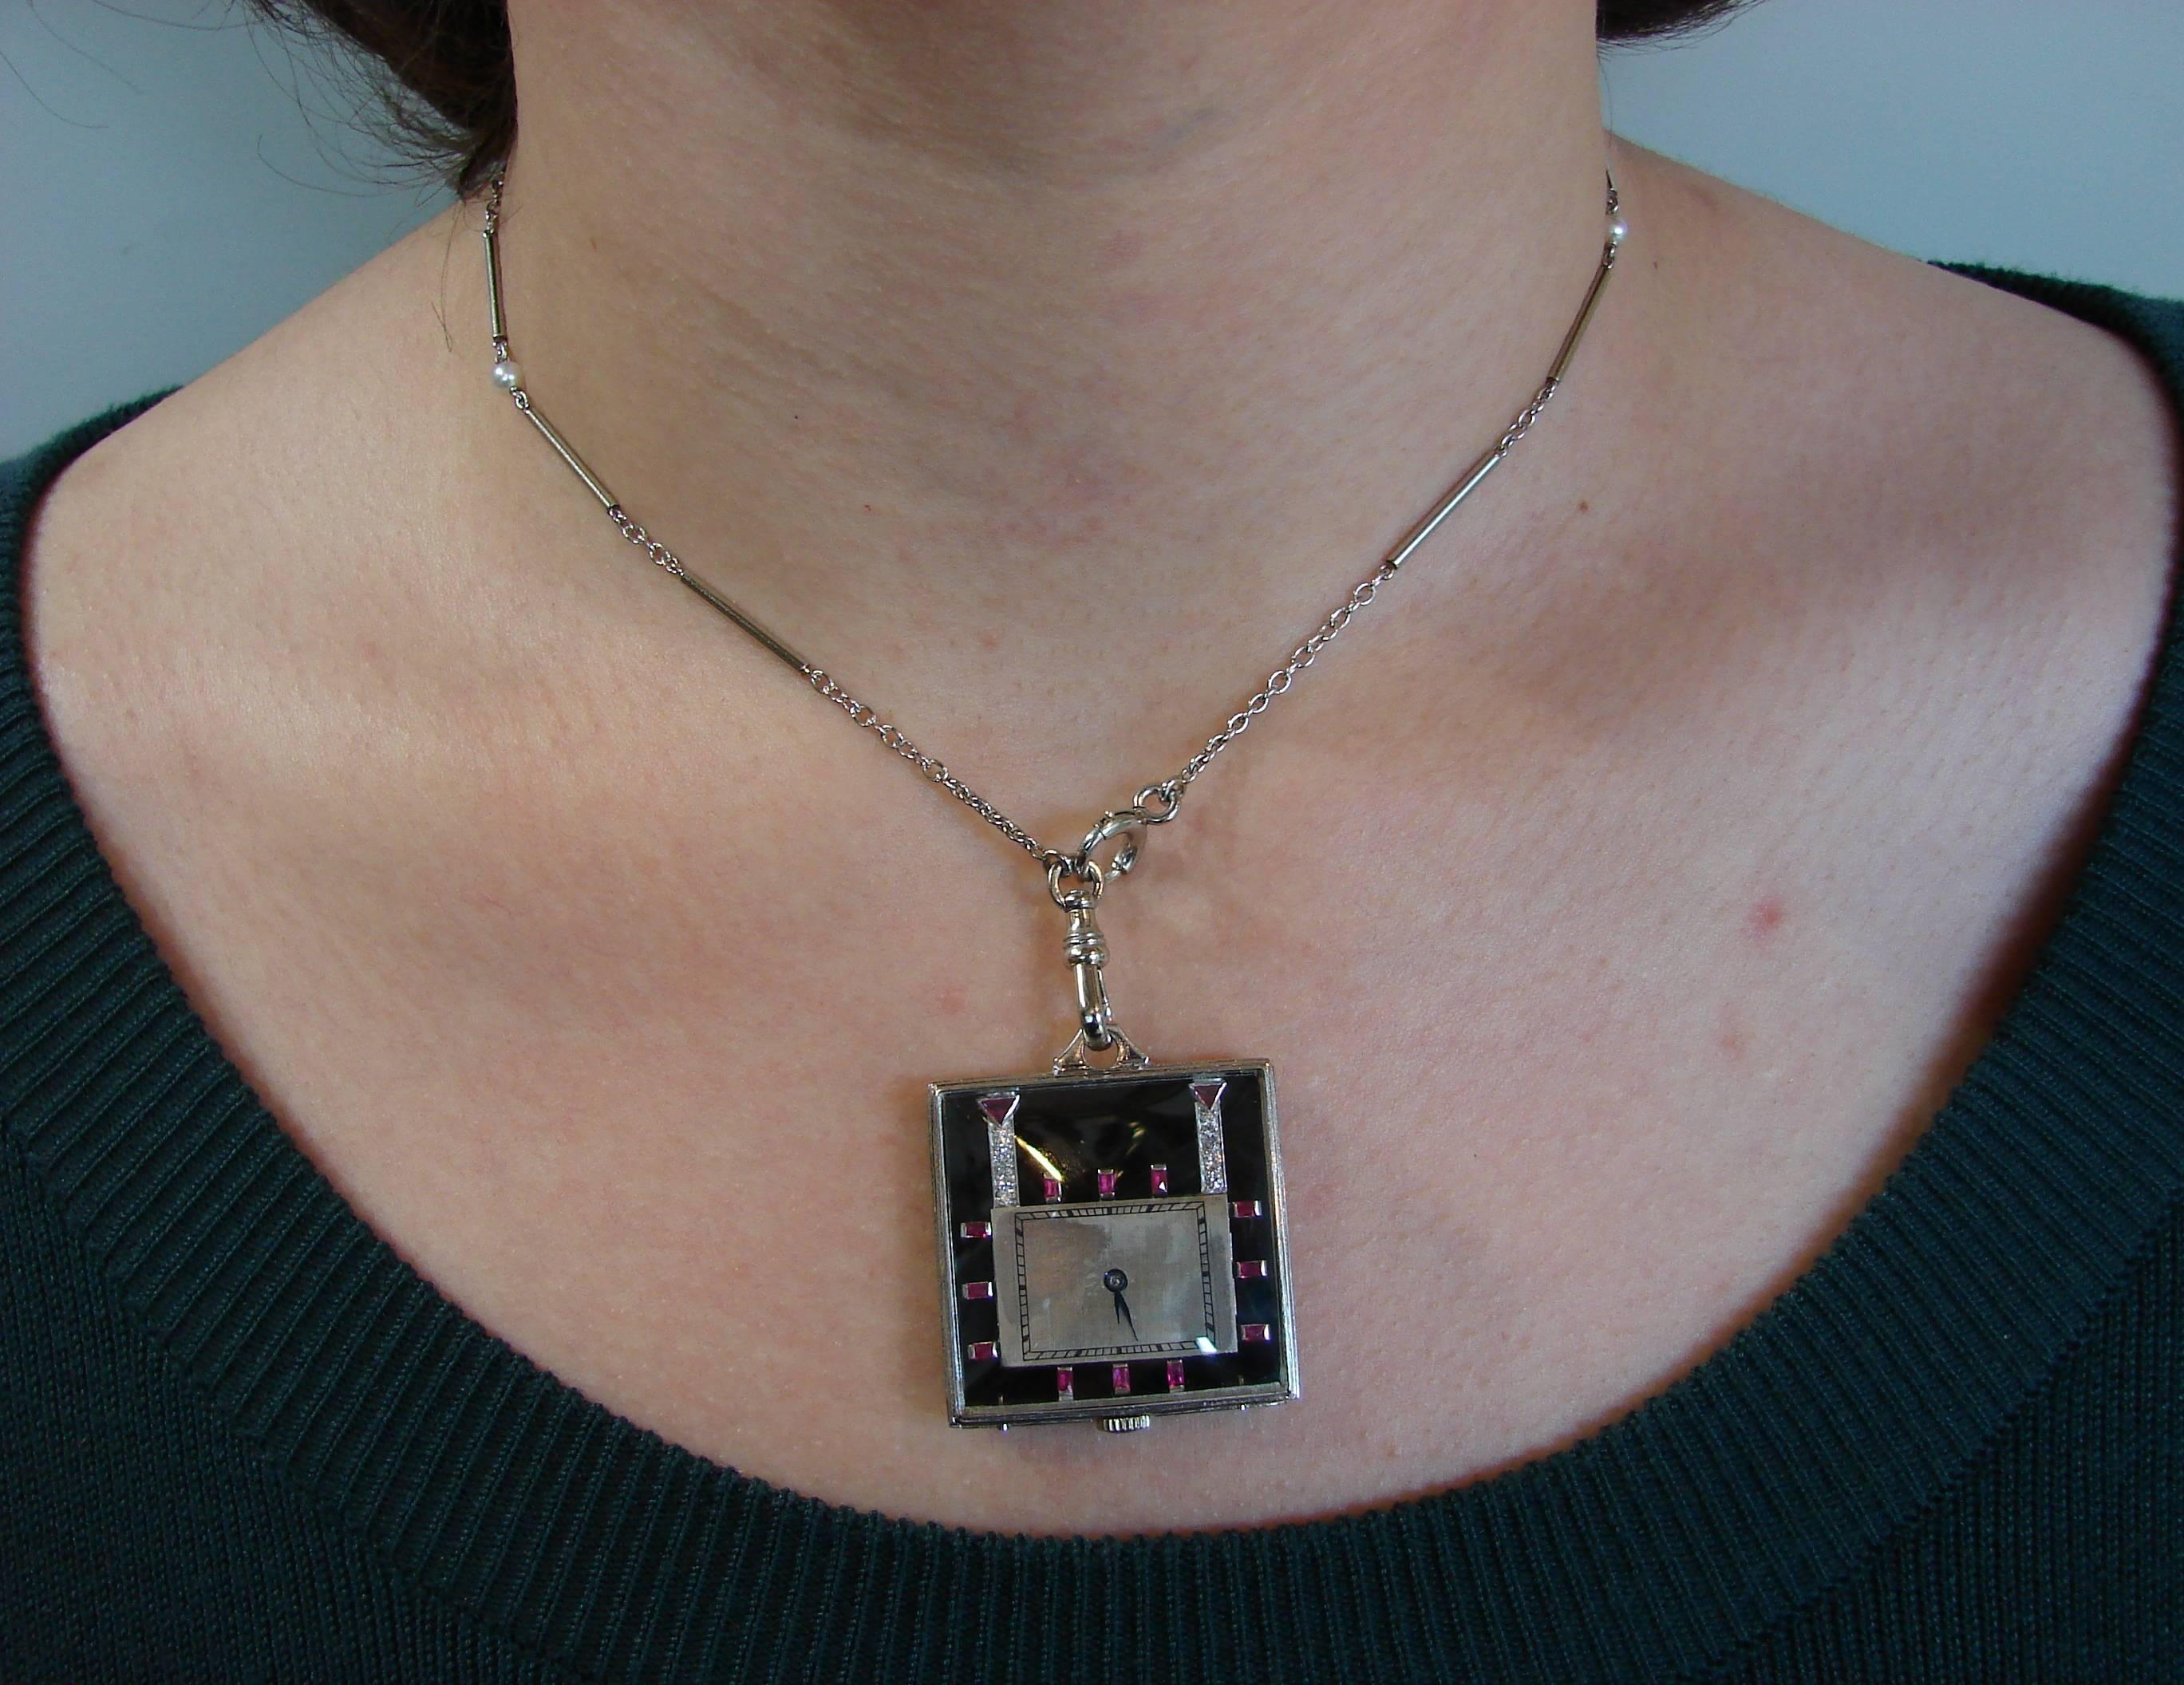 Classy Art Deco Revival watch pendant created in the 1950's. Made of platinum and black onyx and accented with round brilliant cut diamonds and rubies.
The watch is mechanical and manual wind. 
The pendant measures 1.25 x 1.25 inches (3.2 x 3.2 cm),